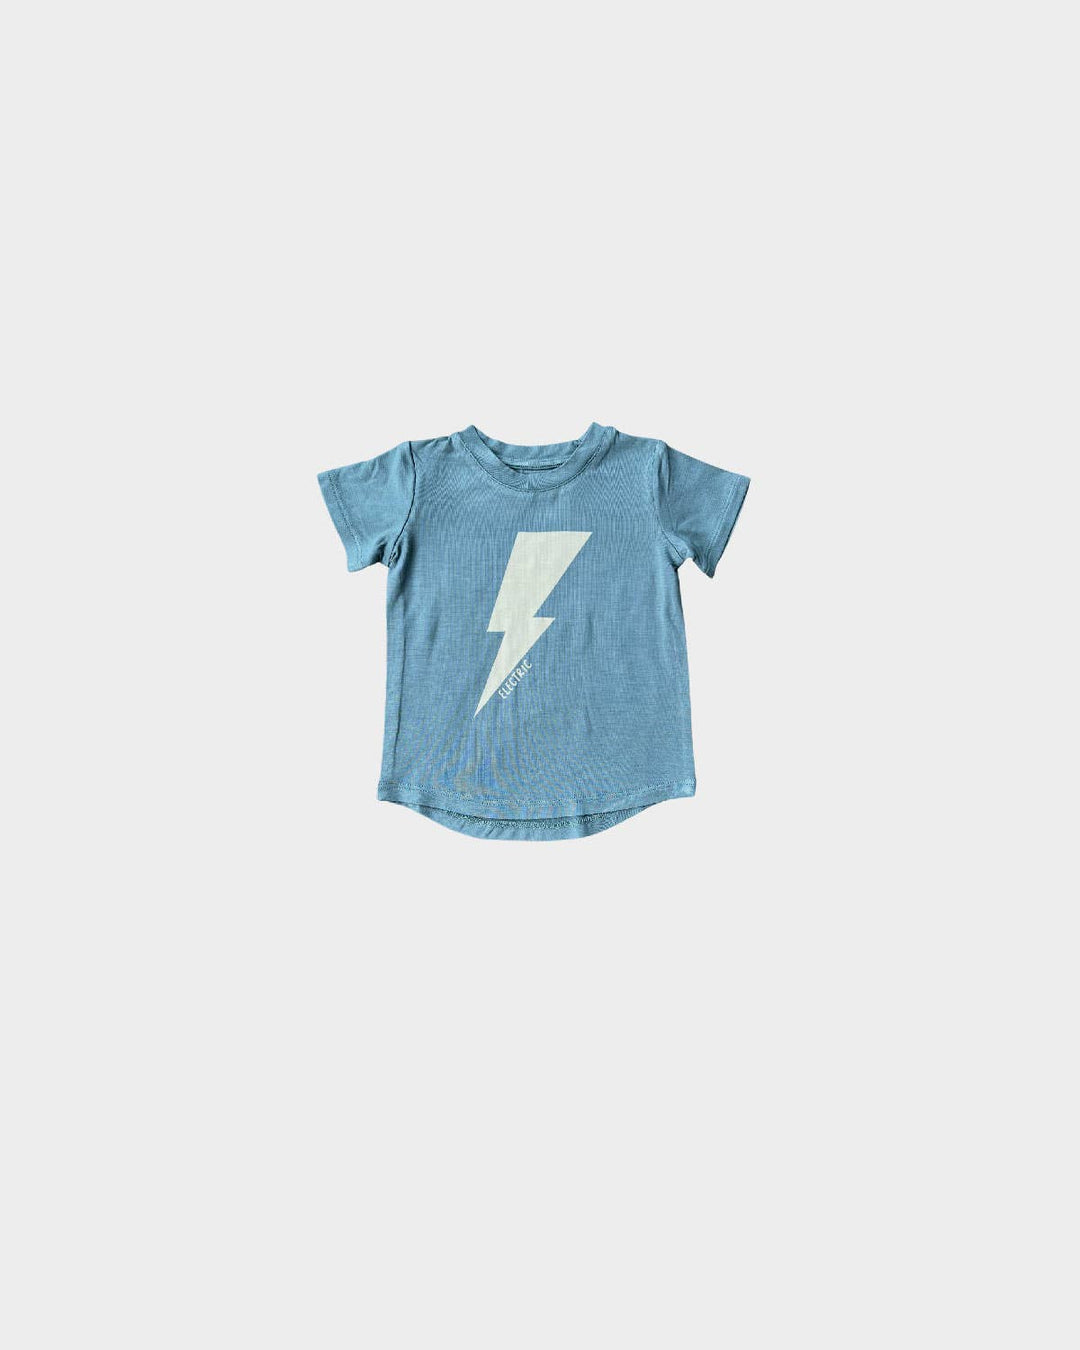 Boy's Tee in Electric